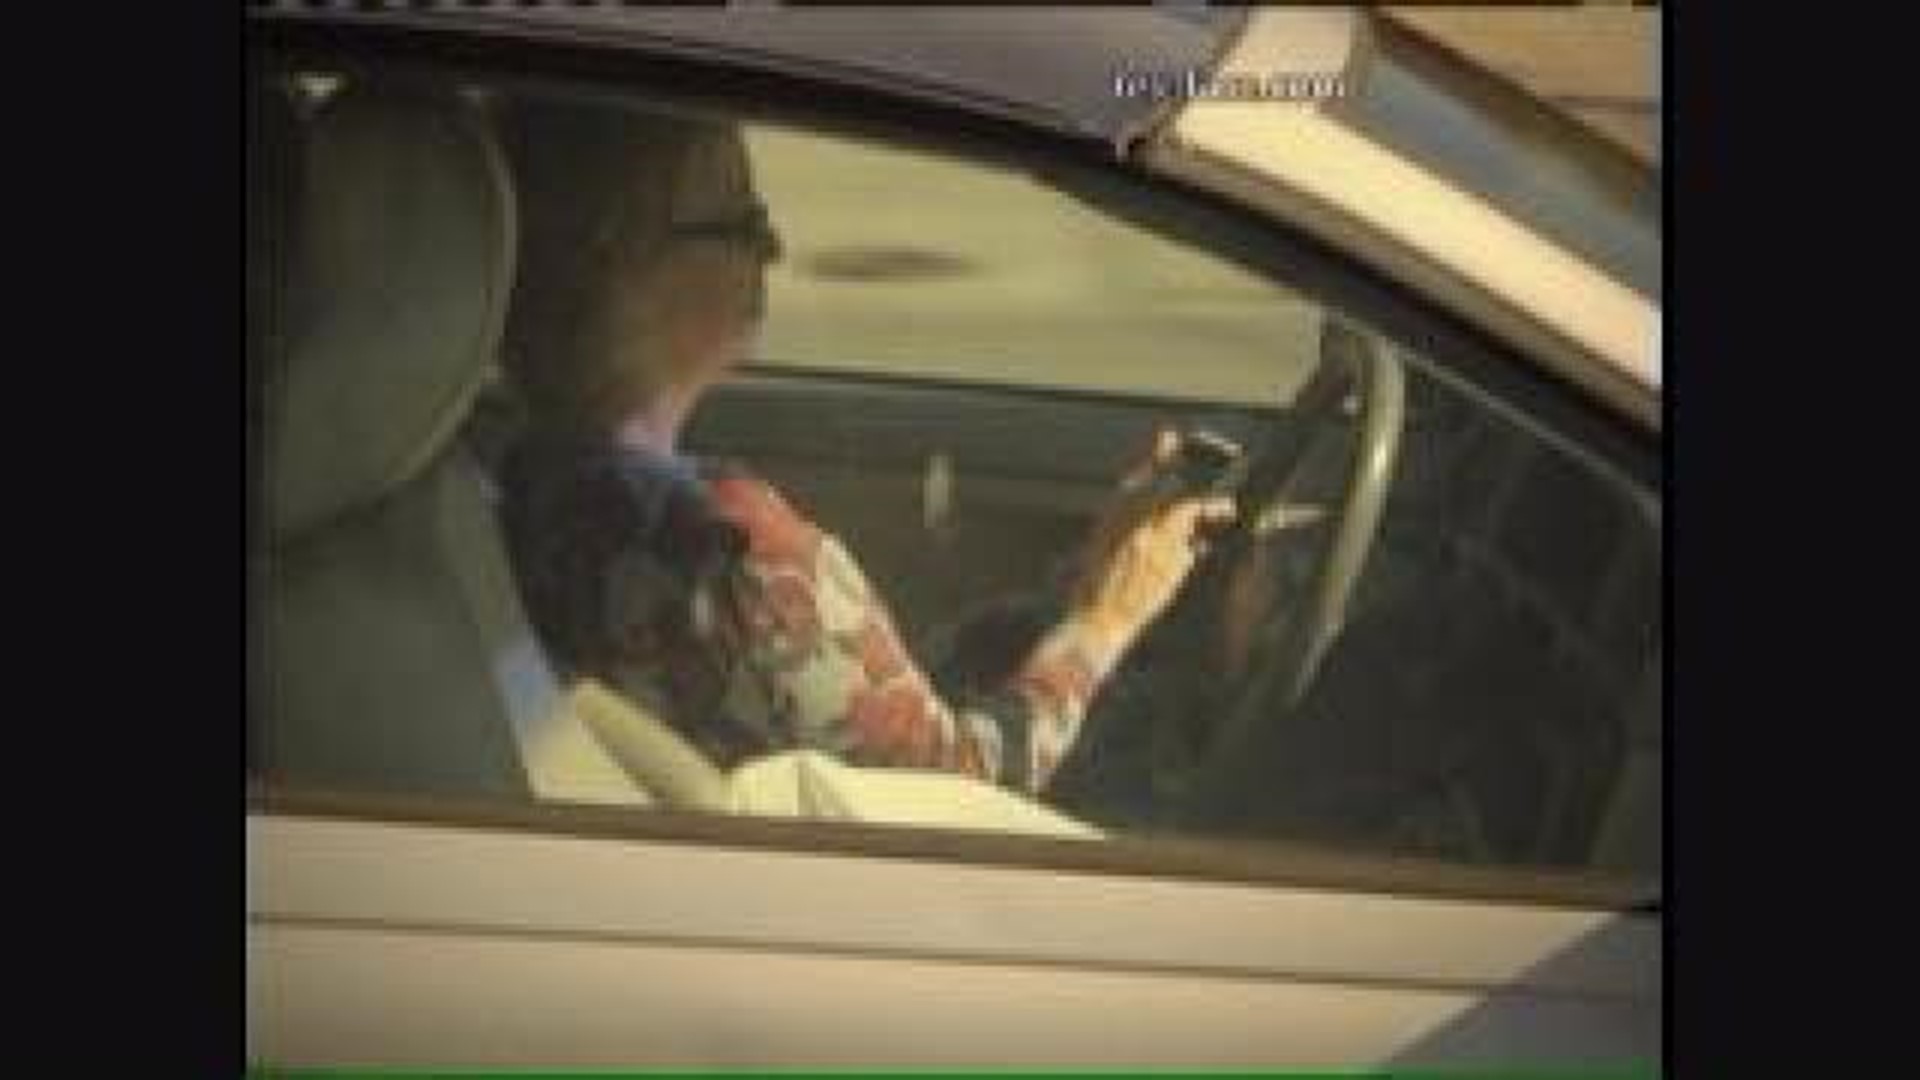 Driving Texters Caught on Camera, Website